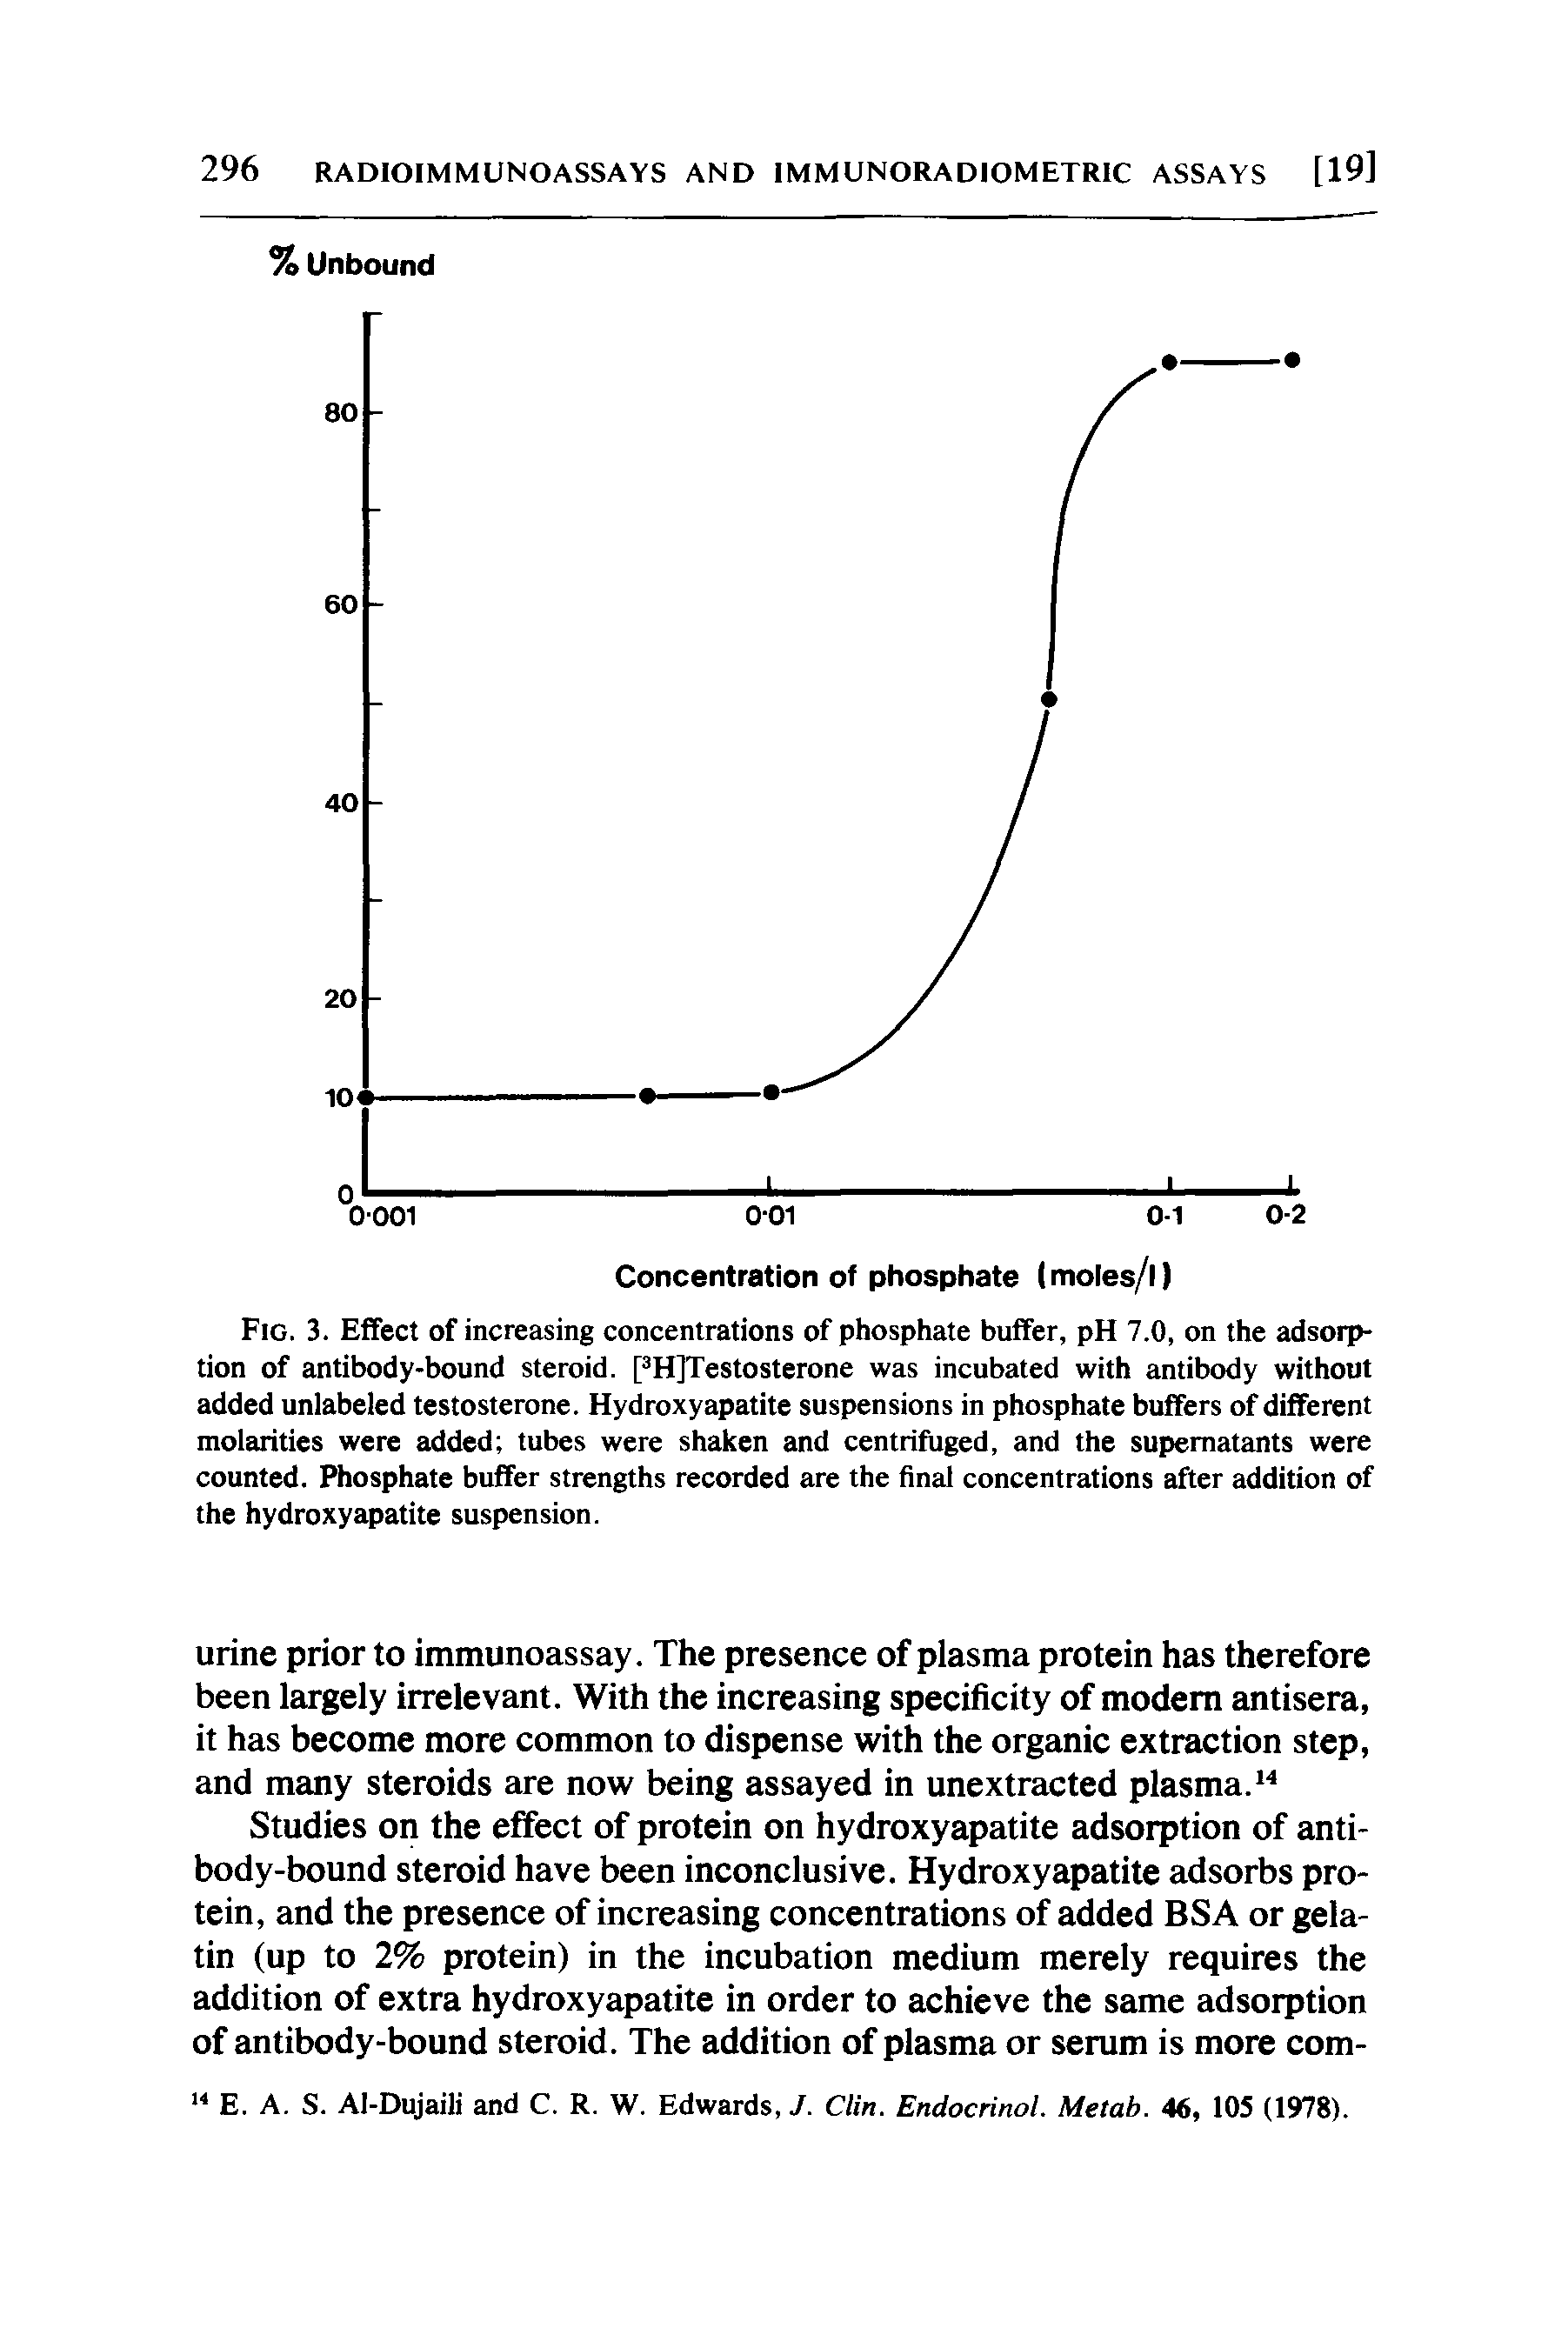 Fig. 3. Effect of increasing concentrations of phosphate buffer, pH 7.0, on the adsorption of antibody-bound steroid. pH]Testosterone was incubated with antibody without added unlabeled testosterone. Hydroxyapatite suspensions in phosphate buffers of different molarities were added tubes were shaken and centrifuged, and the supernatants were counted. Phosphate buffer strengths recorded are the final concentrations after addition of the hydroxyapatite suspension.